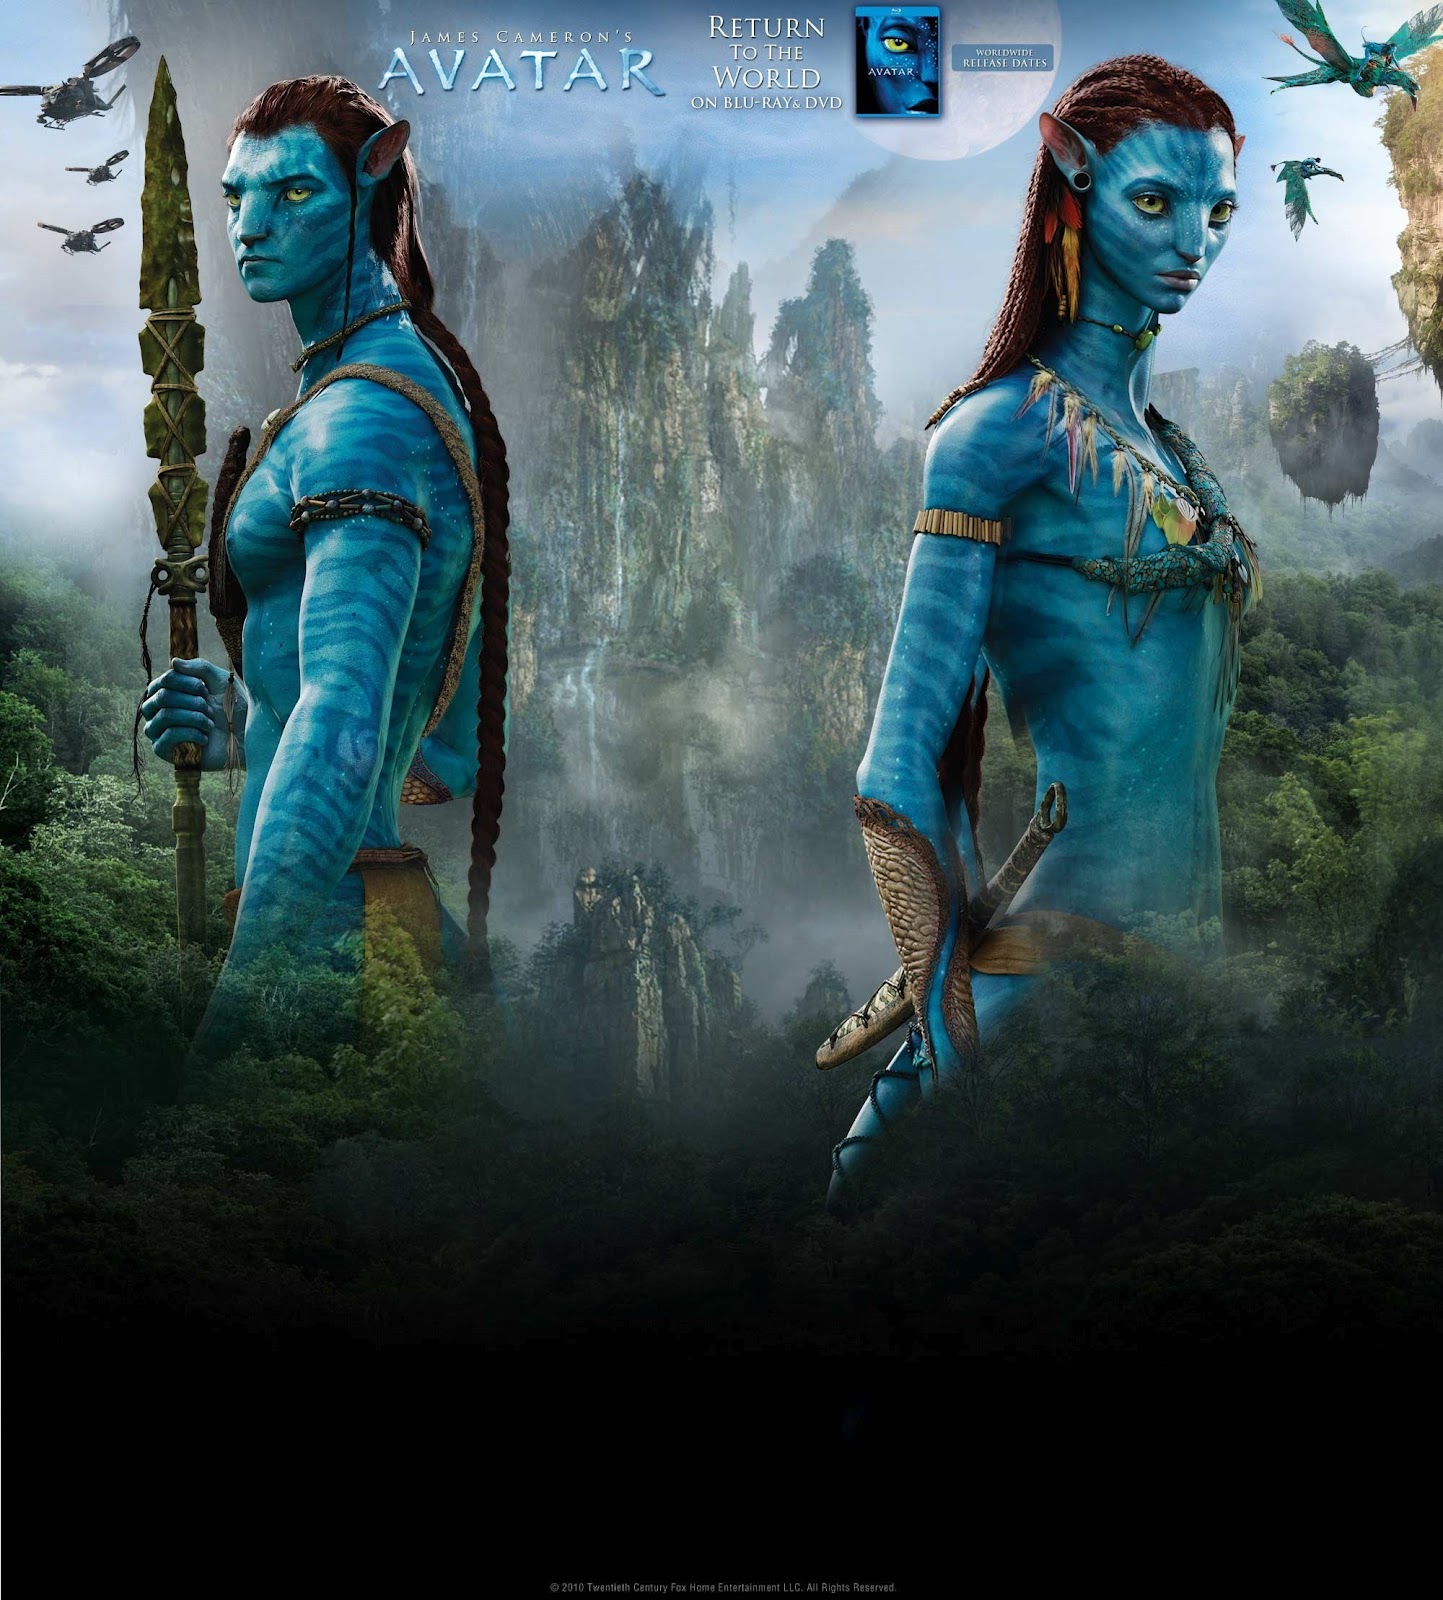 Top 99+ Images pictures of the movie avatar Full HD, 2k, 4k